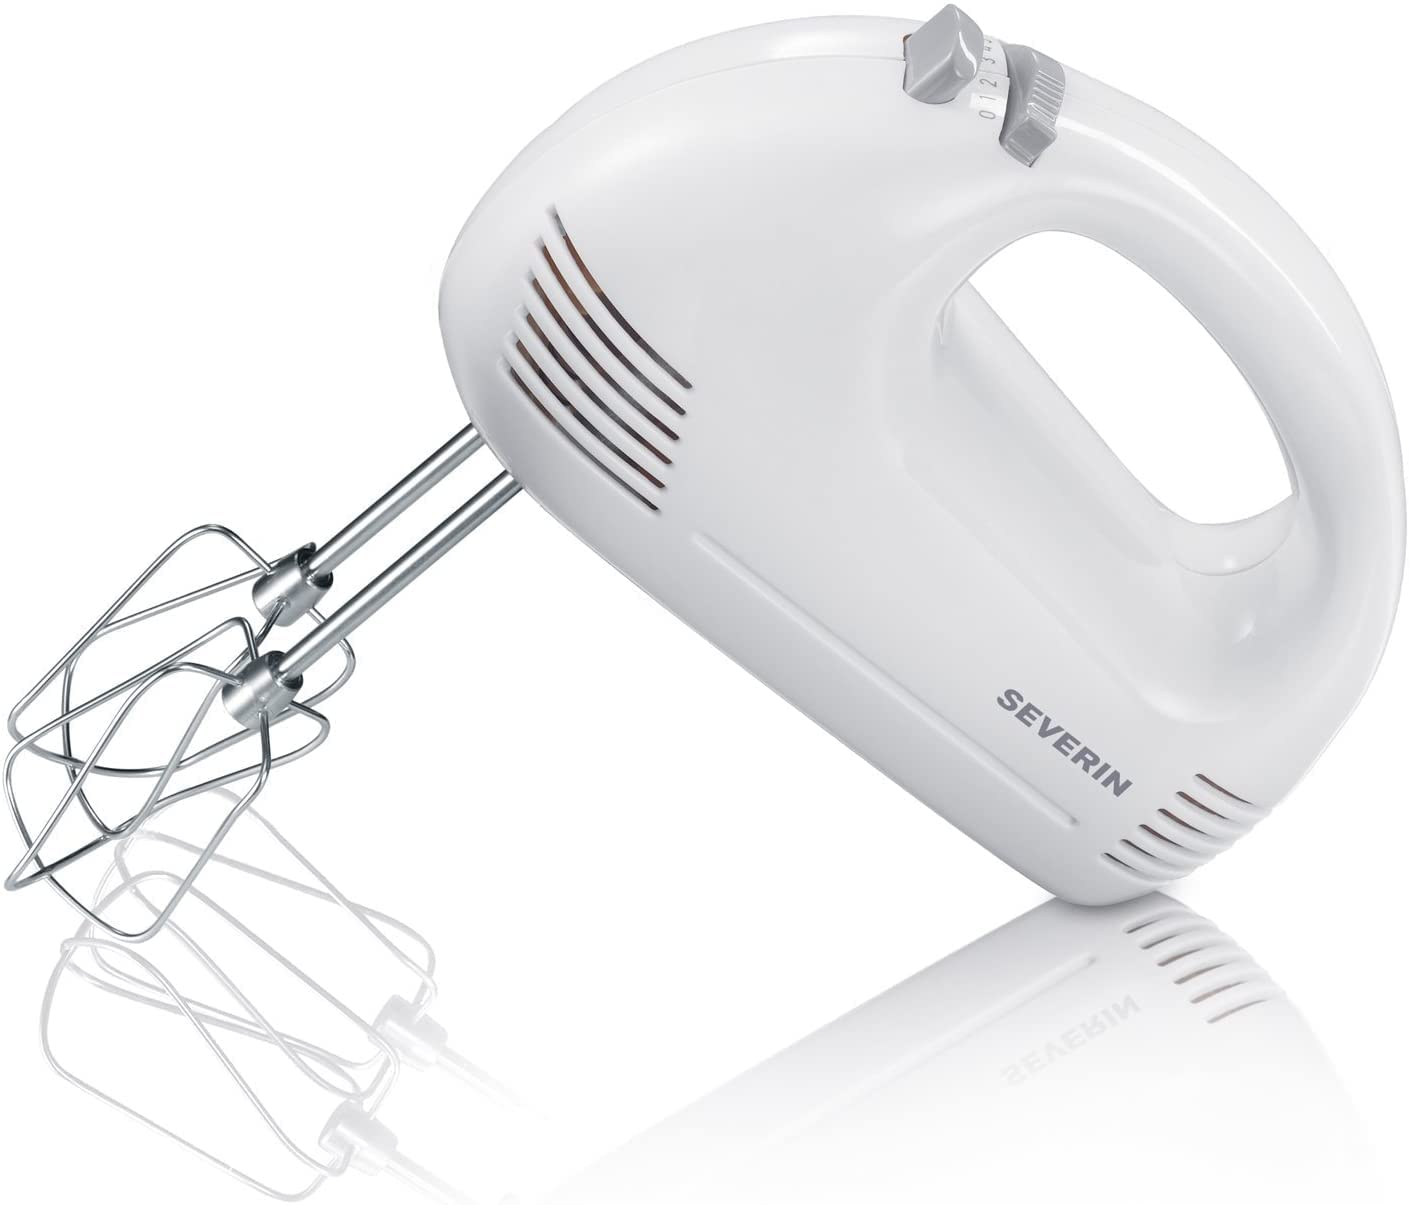 Severin HM 3827 hand mixer (approximately 200 W), white